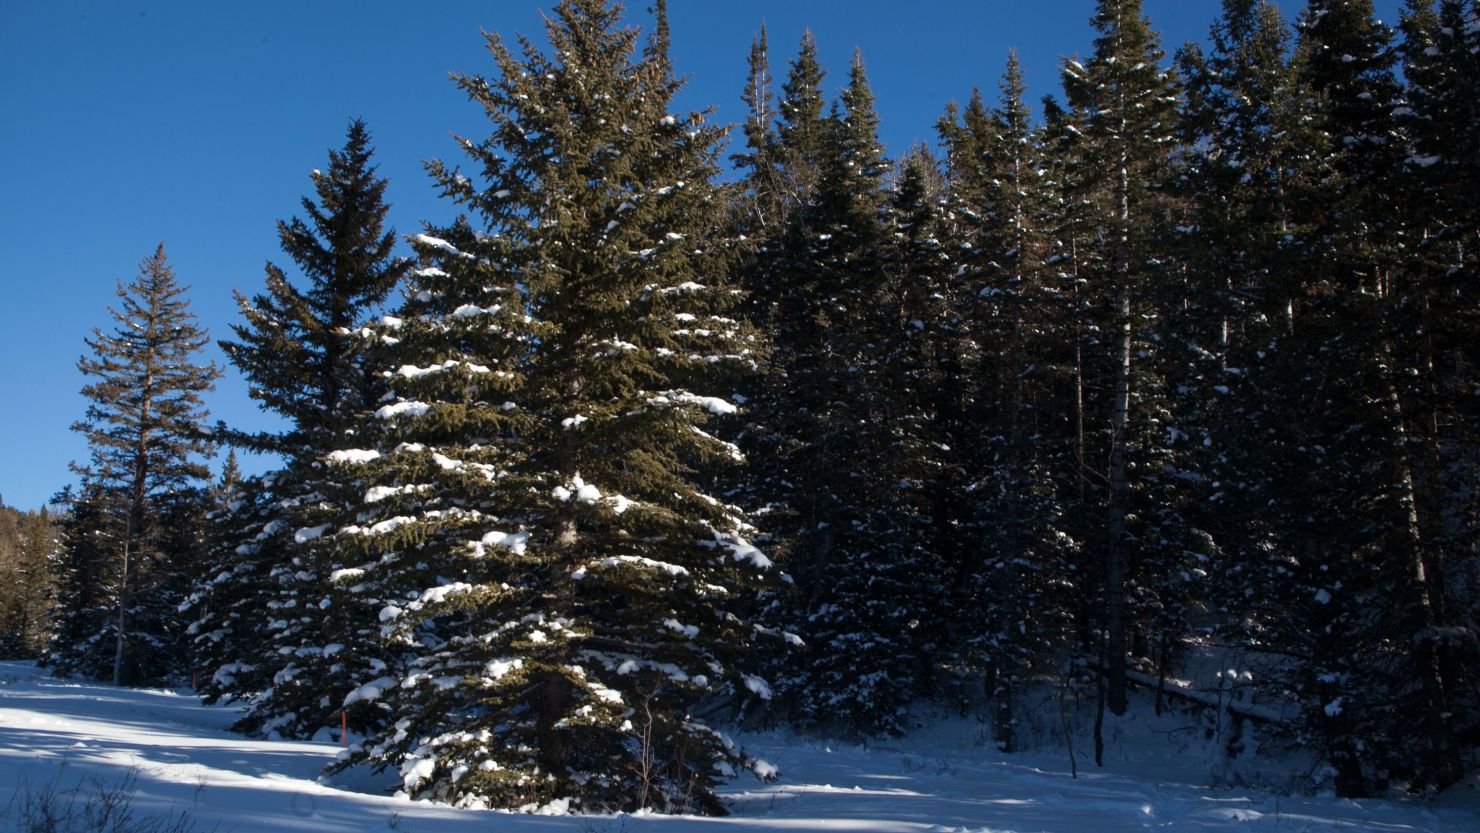 Families are taking to cutting their own Christmas tree in national forests, like Dixie National Forest in Utah, a tradition that brings people into the forests and benefits the trees' health.